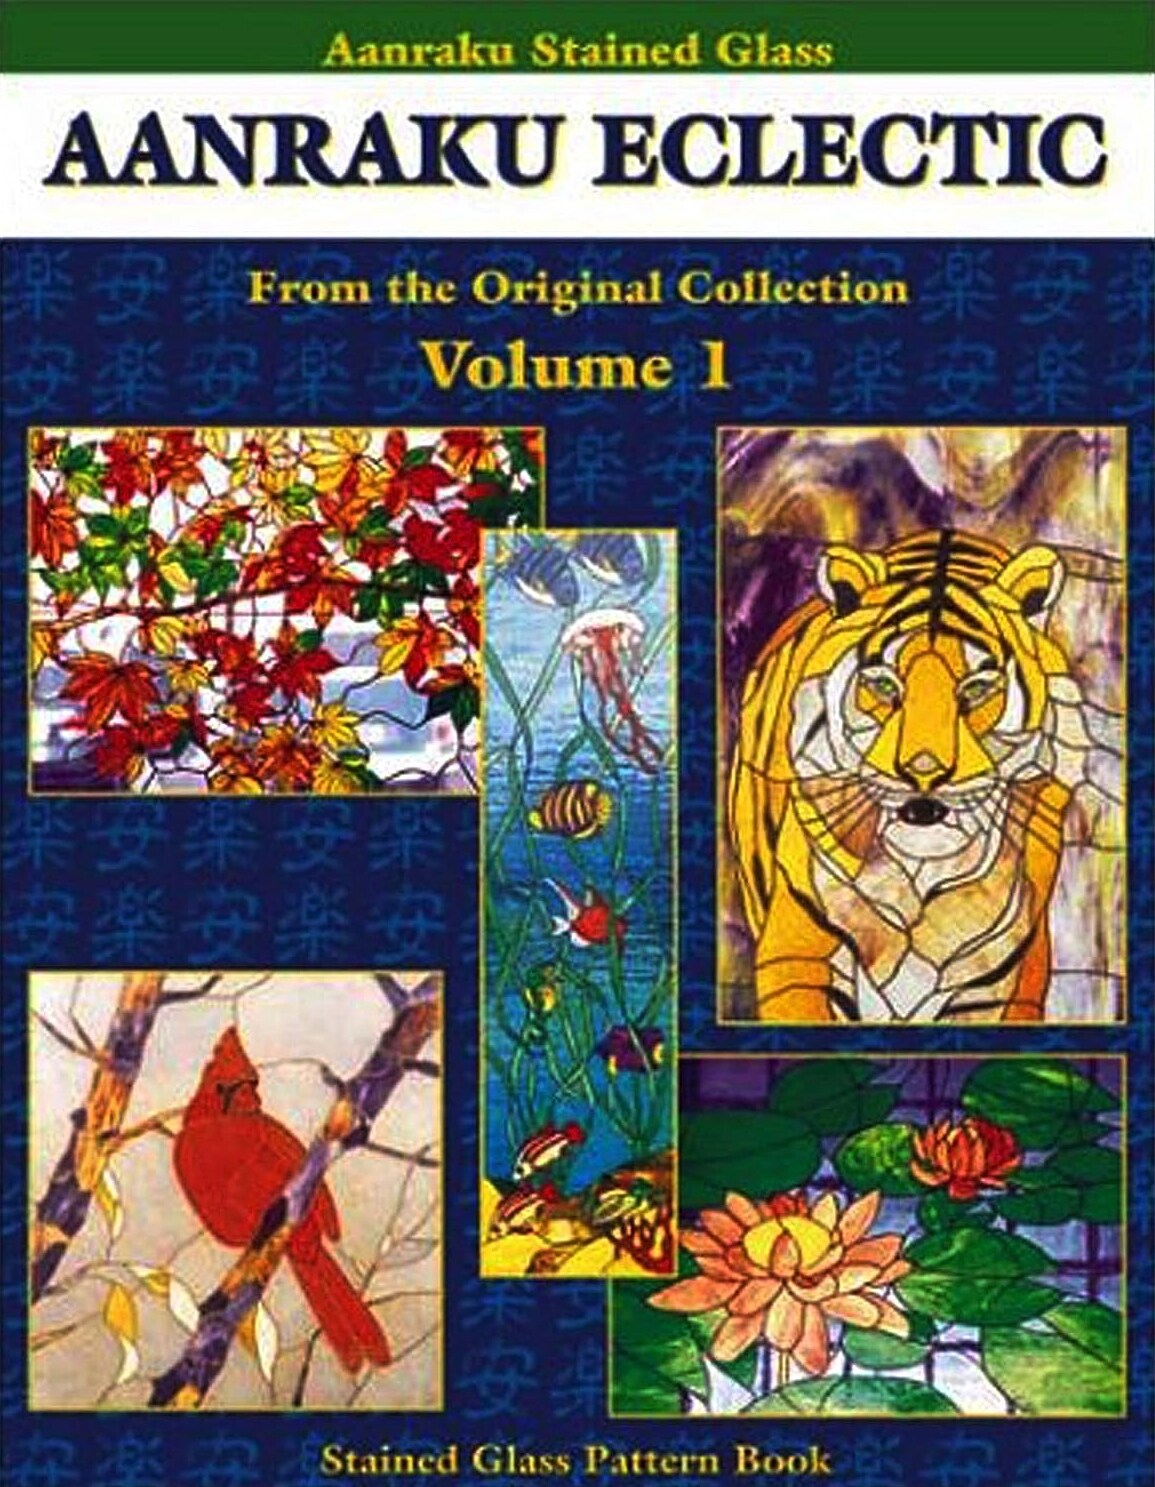 Stained Glass Pattern Book: Aanraku Eclectic Stained Glass Patterns Volume 1